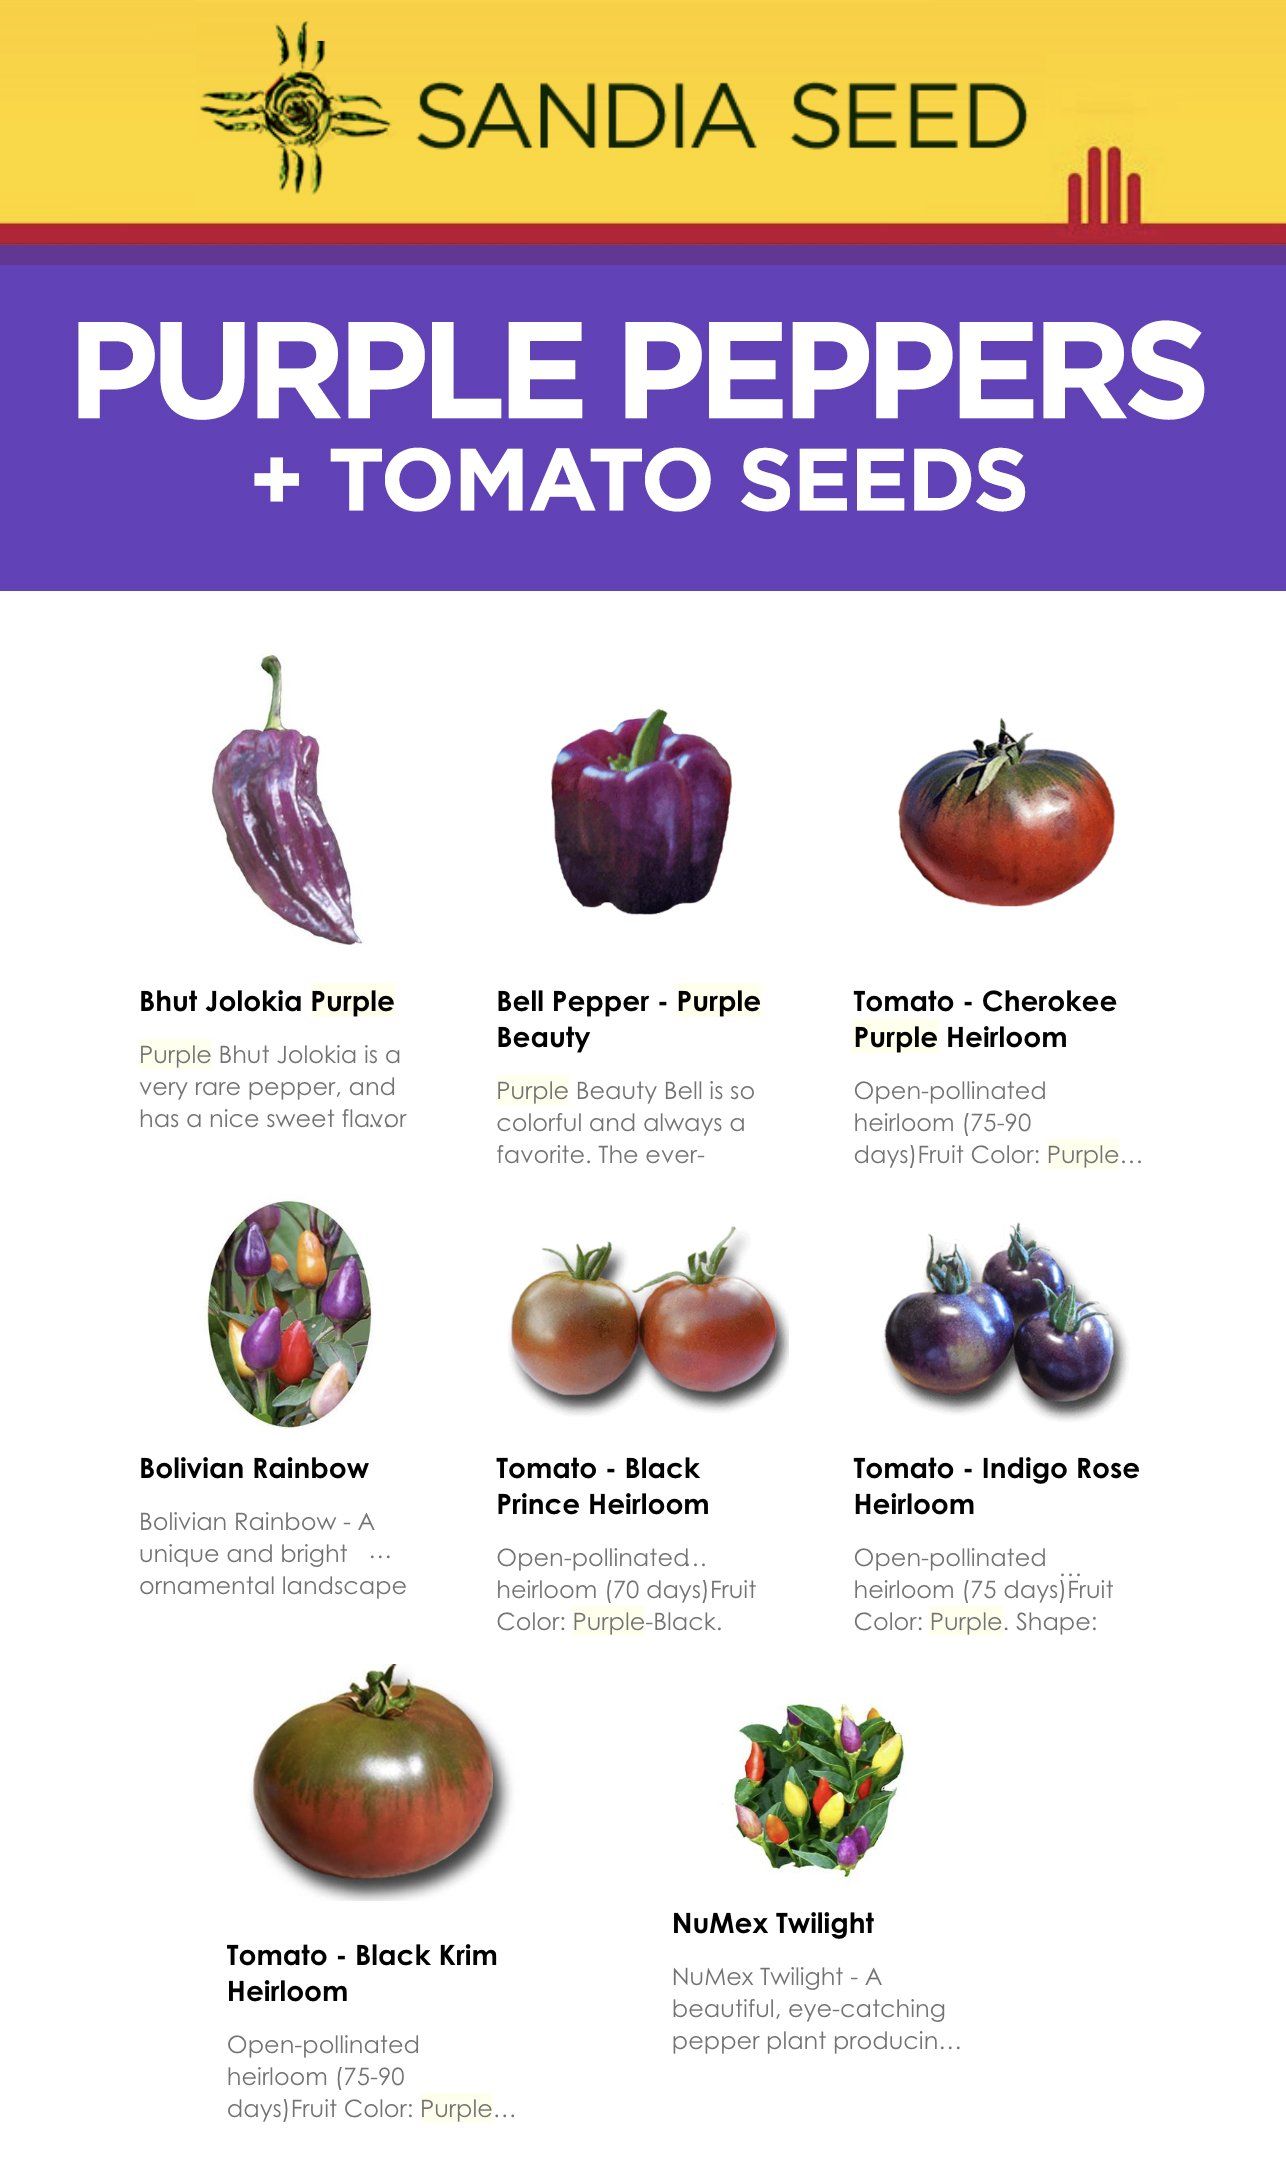 Purple Bell Peppers - Seeds for Purple peppers and Heirloom Tomatoes